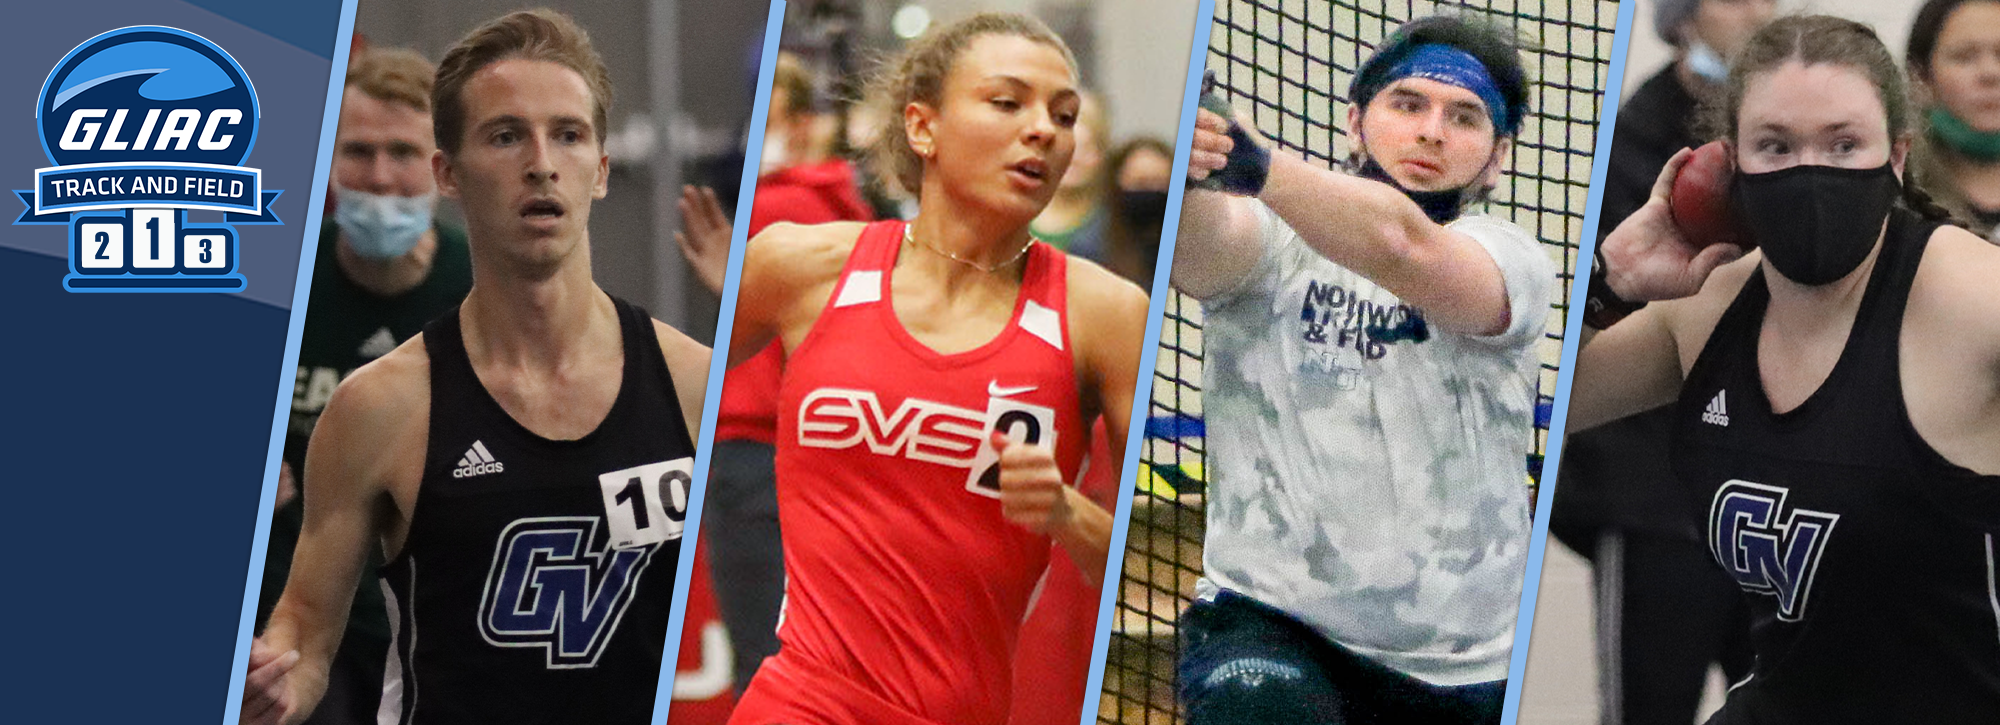 GLIAC Announces Indoor Track and Field Athletes of the Week